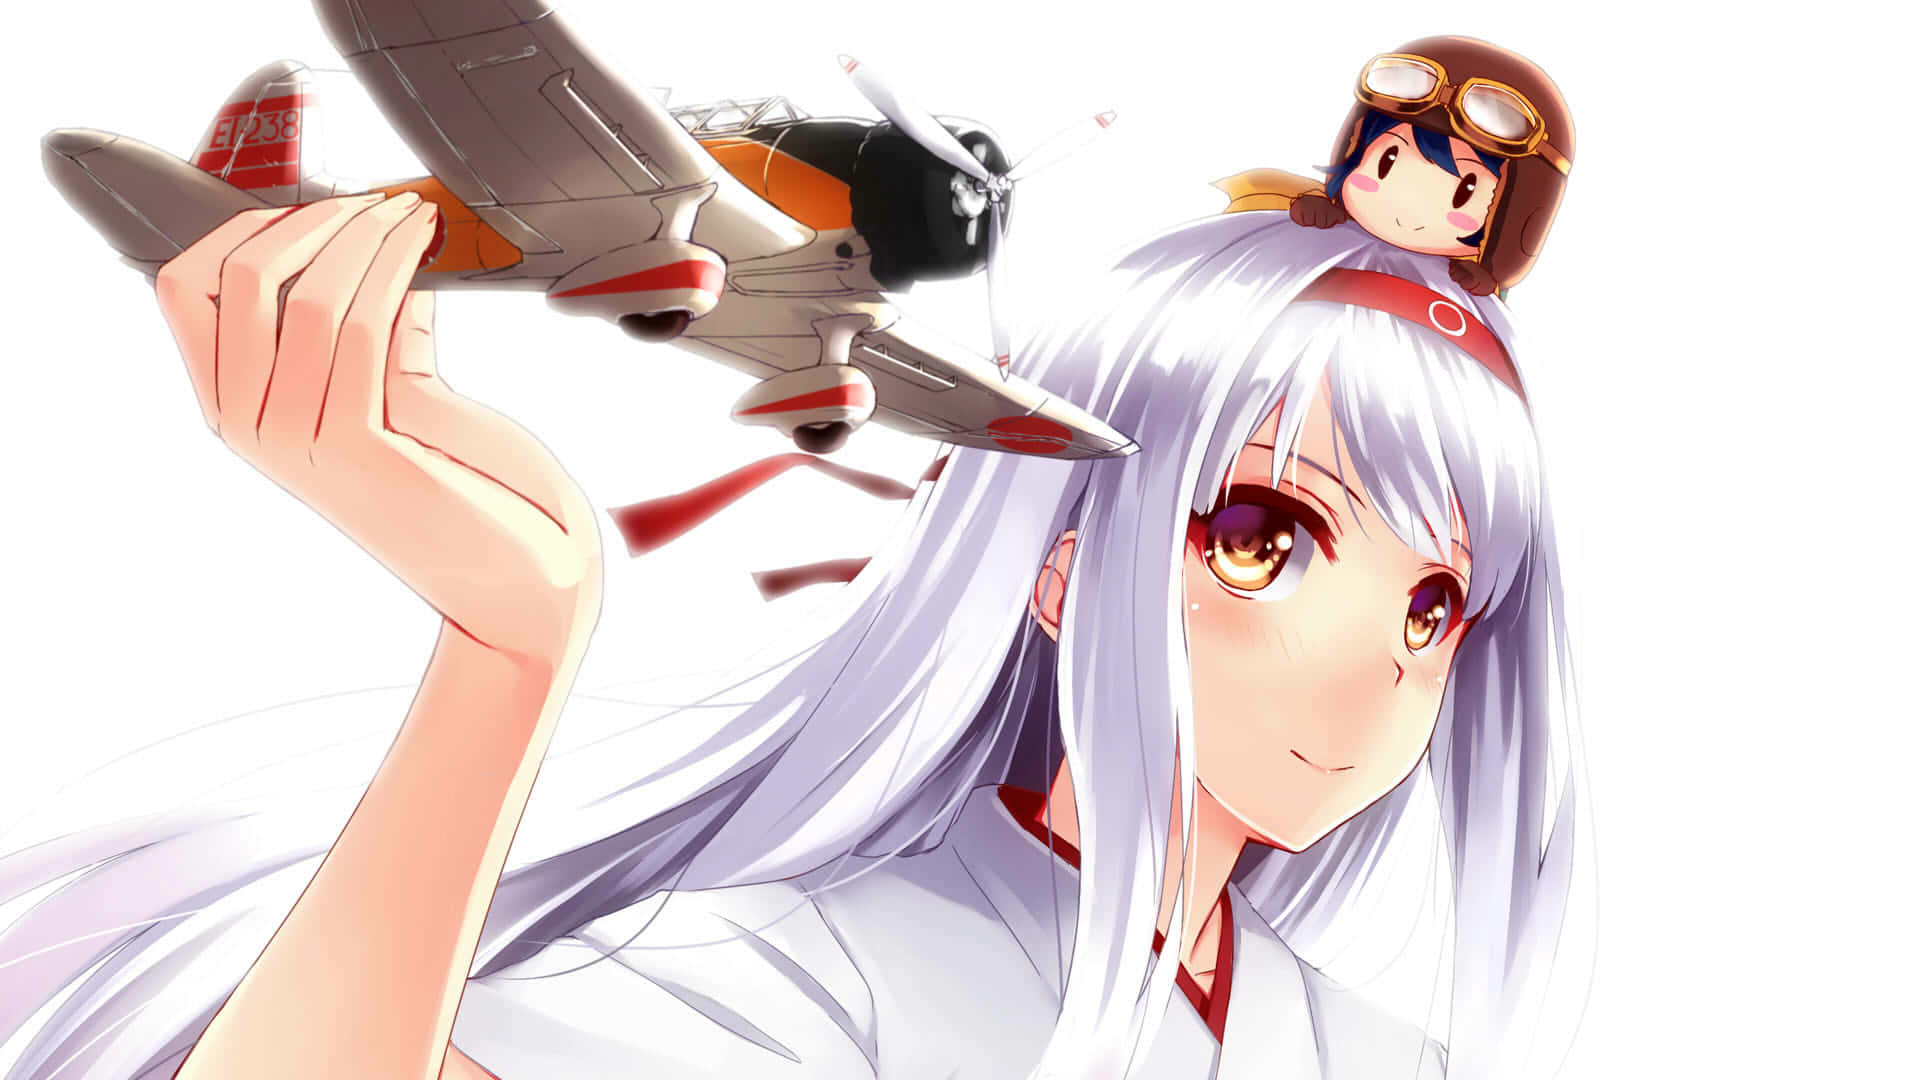 Explore the depths of the ocean with Kantai Collection!" Wallpaper